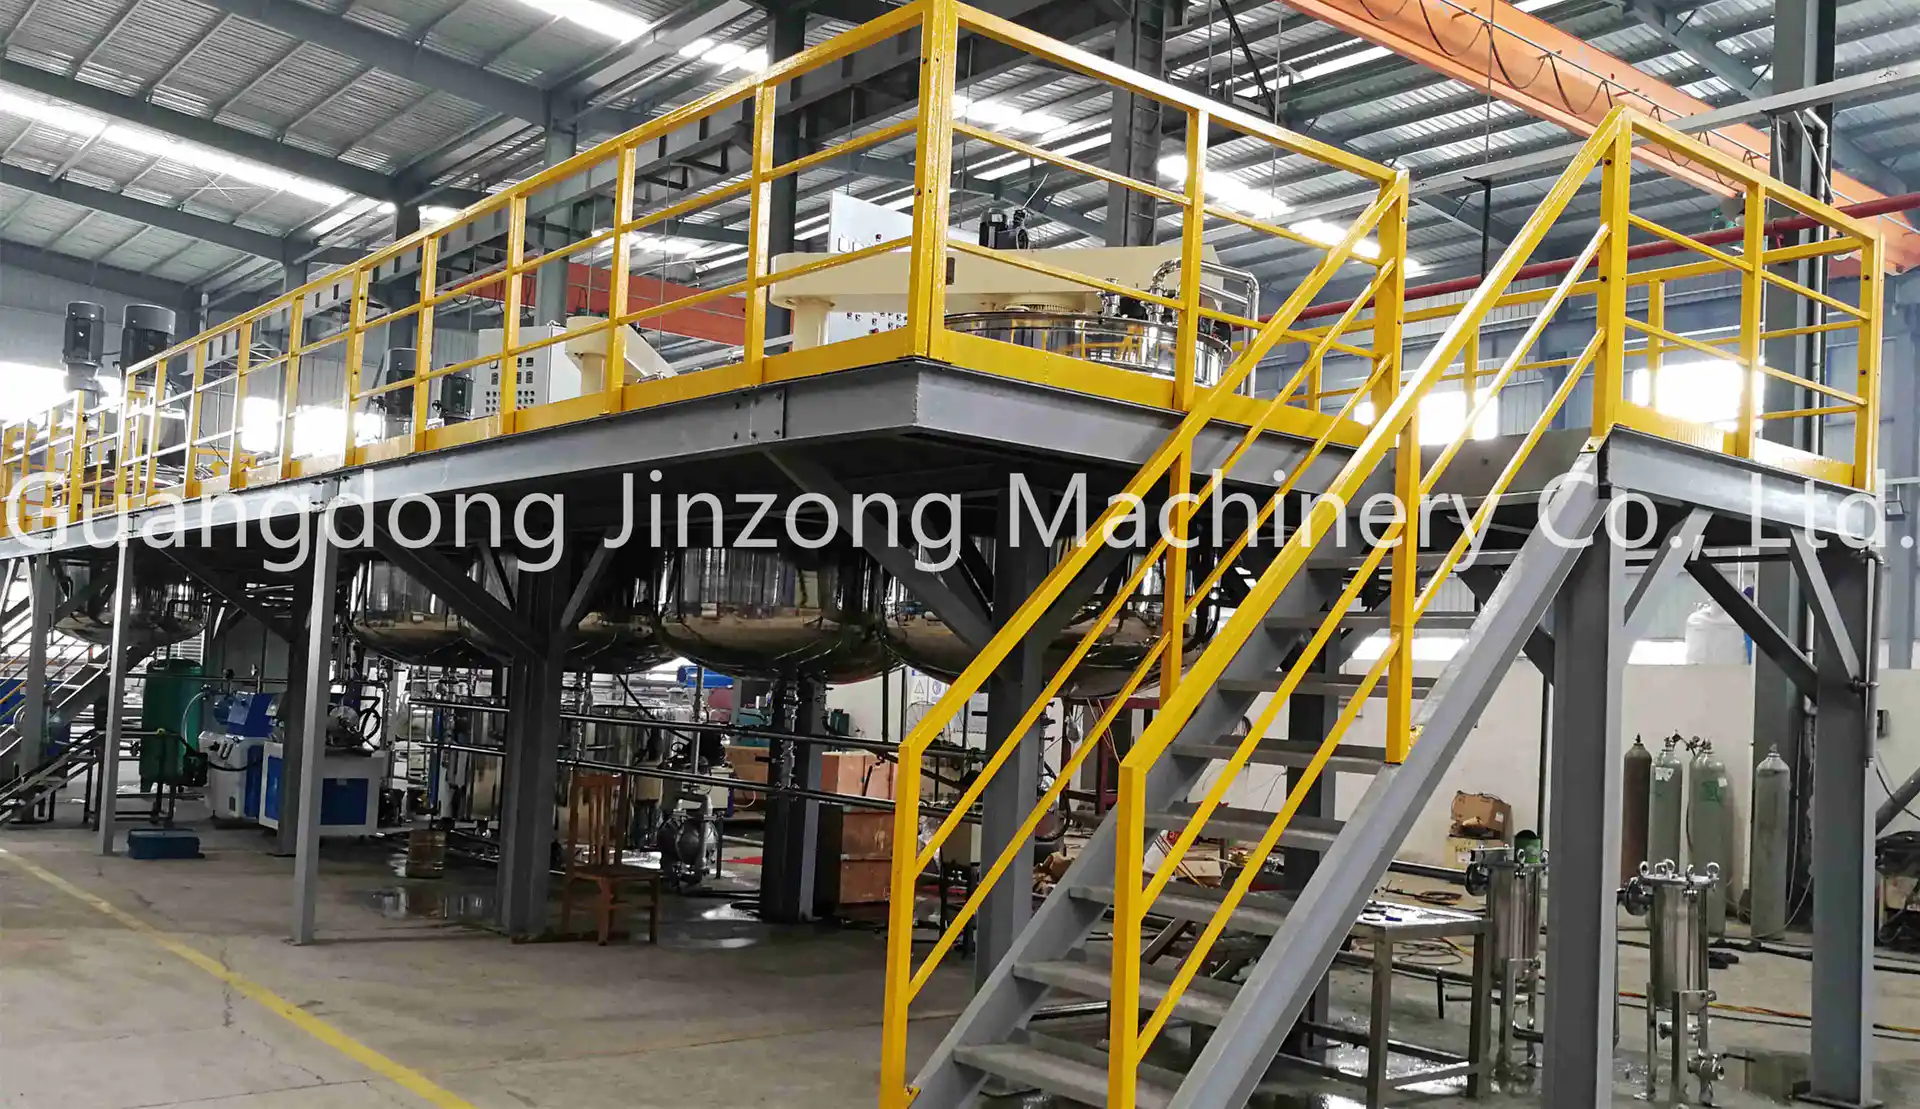 Complete Polyester Paint Production Line Equipment